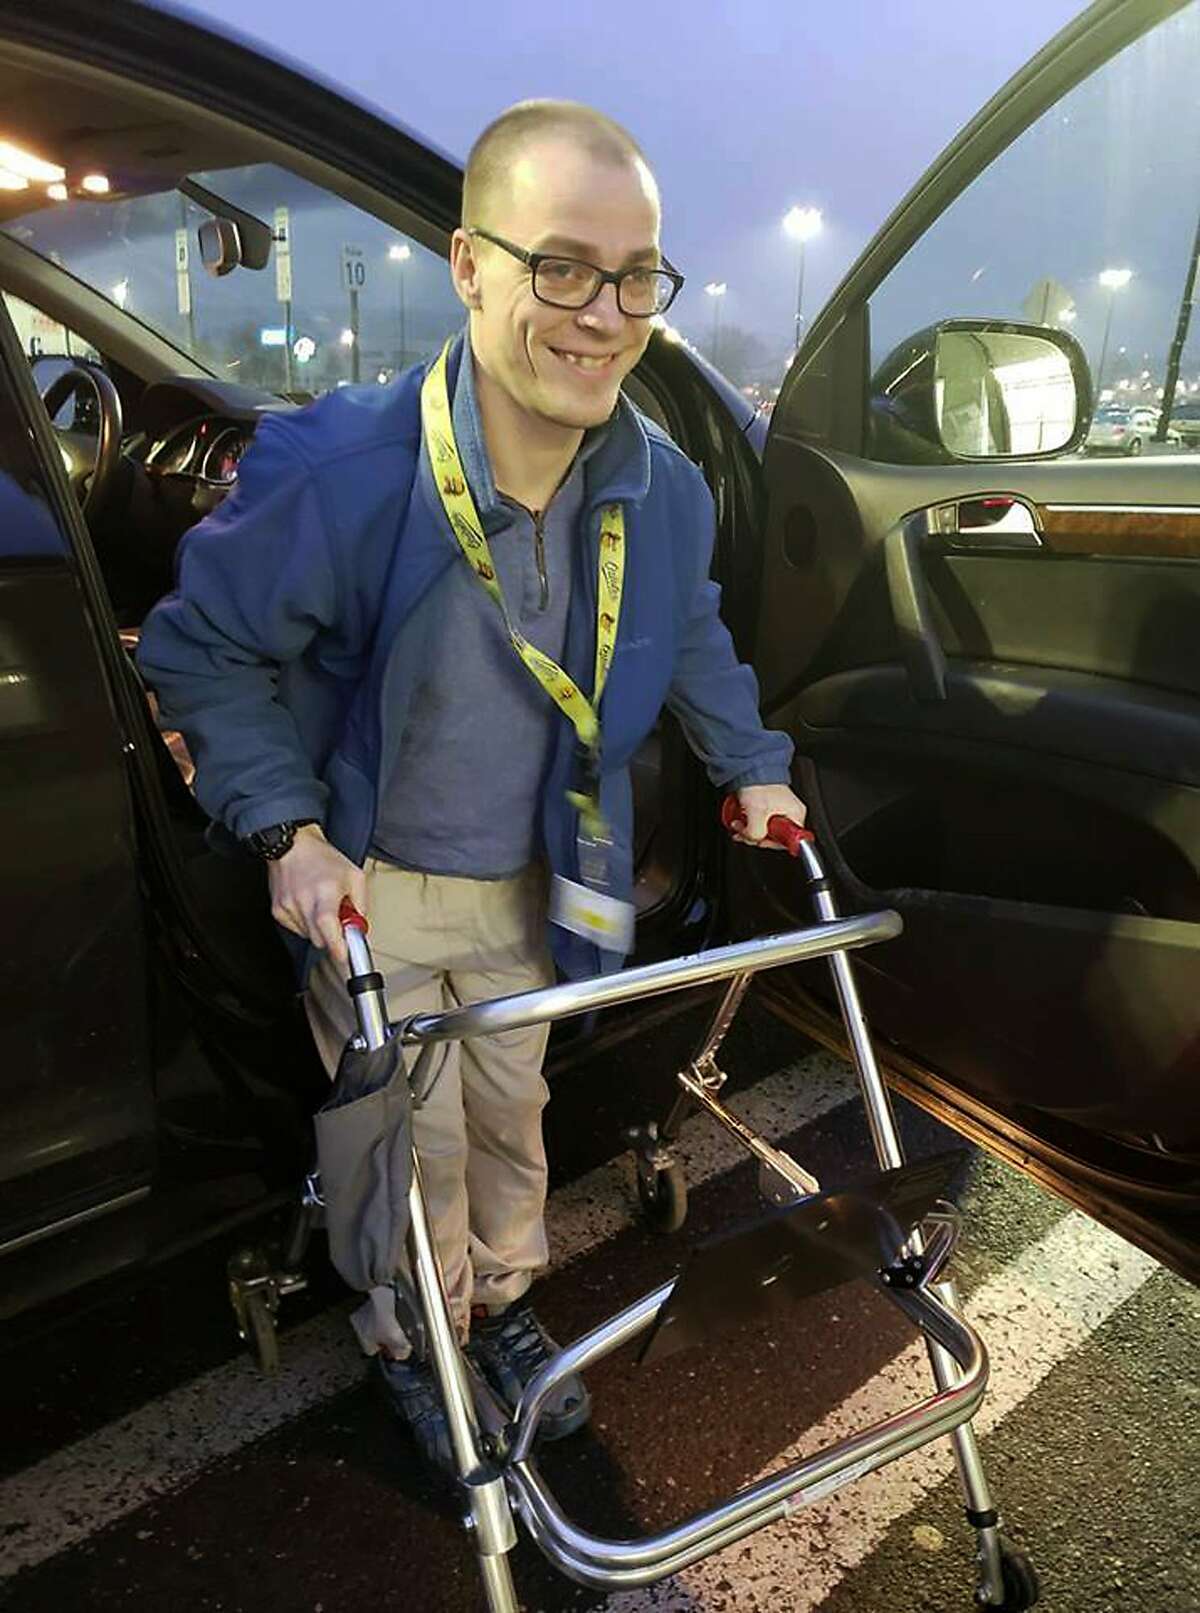 In this Dec. 14, 2018 photo provided by Holly Catlin, Adam Catlin gets out of a car before starting his shift at a Walmart in Selinsgrove, Pa. Catlin, who has cerebral palsy, is afraid he’ll be out of work after store officials changed his job description to add tasks that he’s physically unable to do. (Holly Catlin via AP)